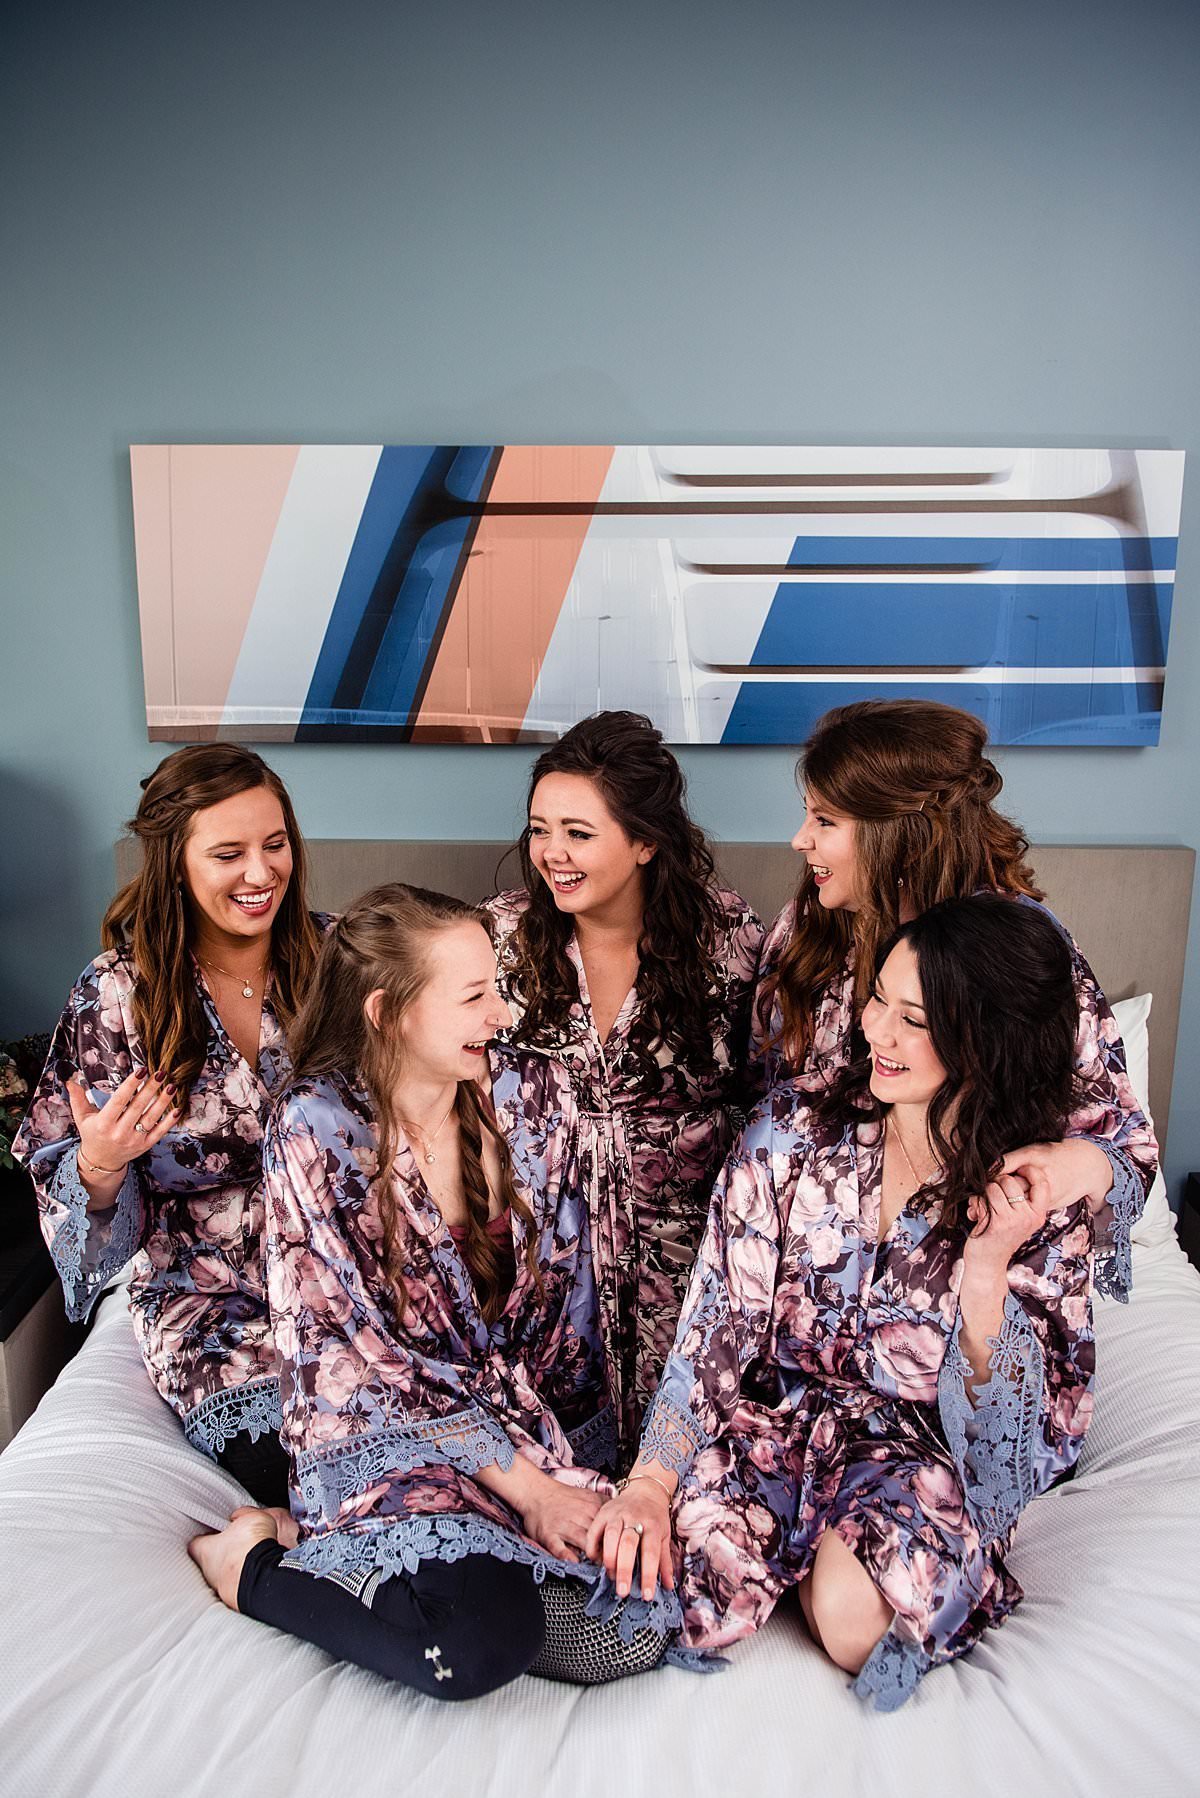 Bride with her girlfriends  in purple and pink robes sitting together on a bed